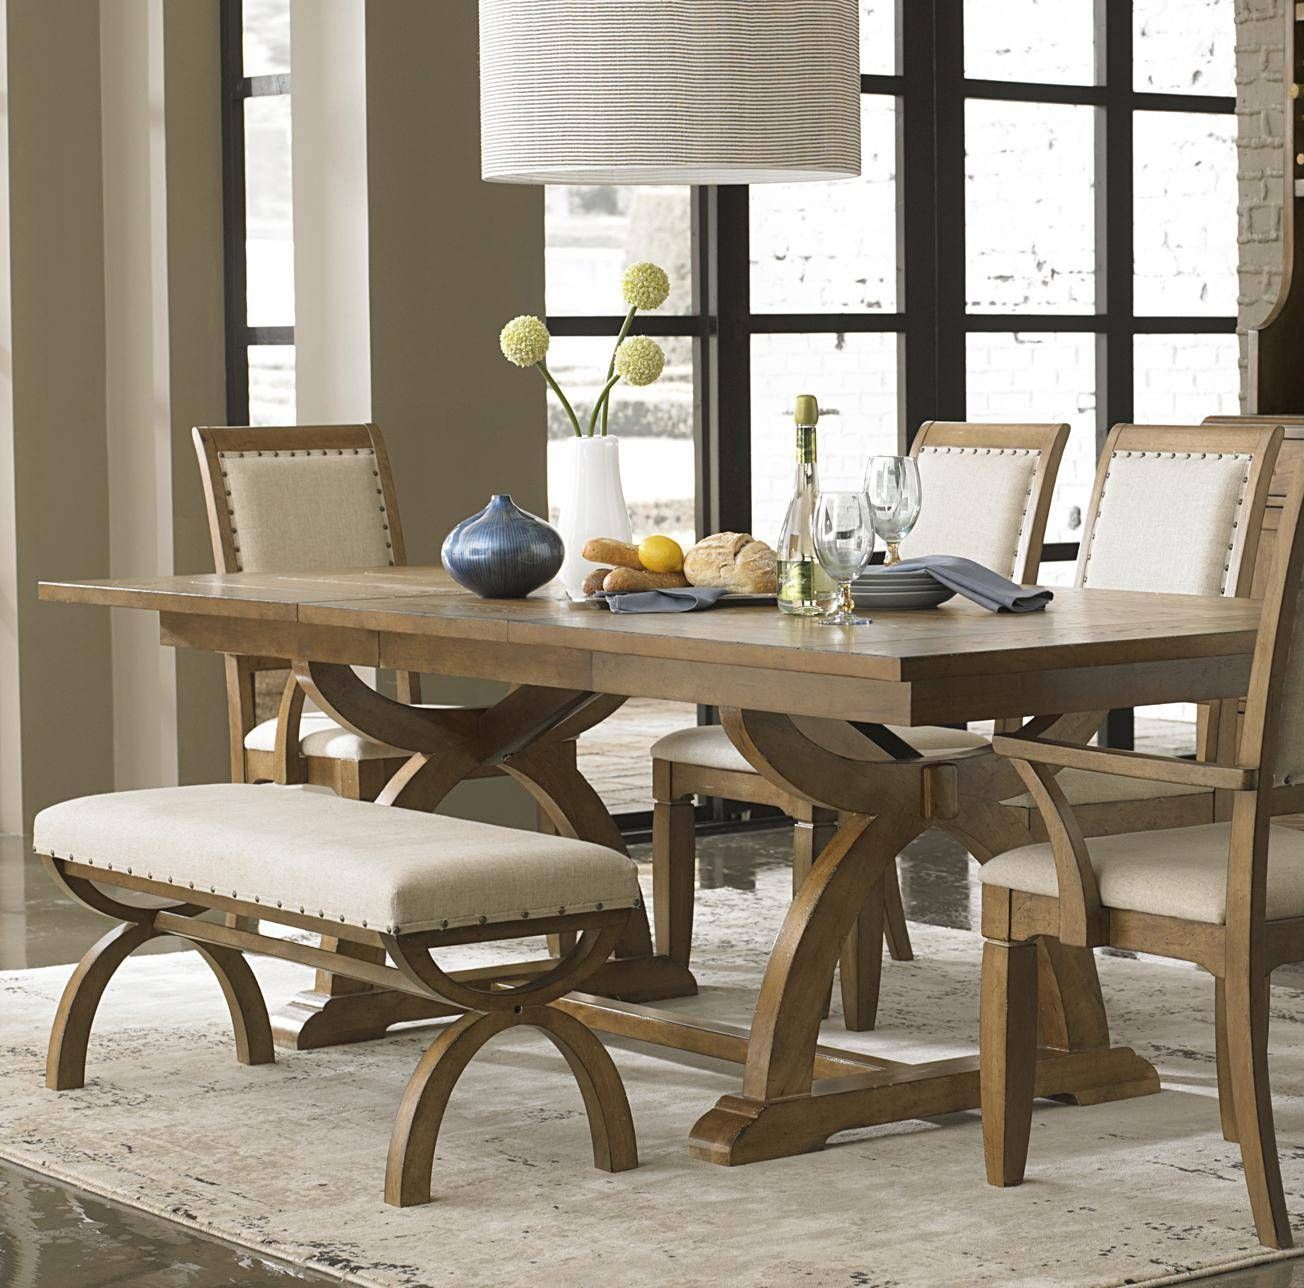 Dining Room Table With Bench Seat | Homesfeed Throughout Dining Room Bench Sofas (View 11 of 15)